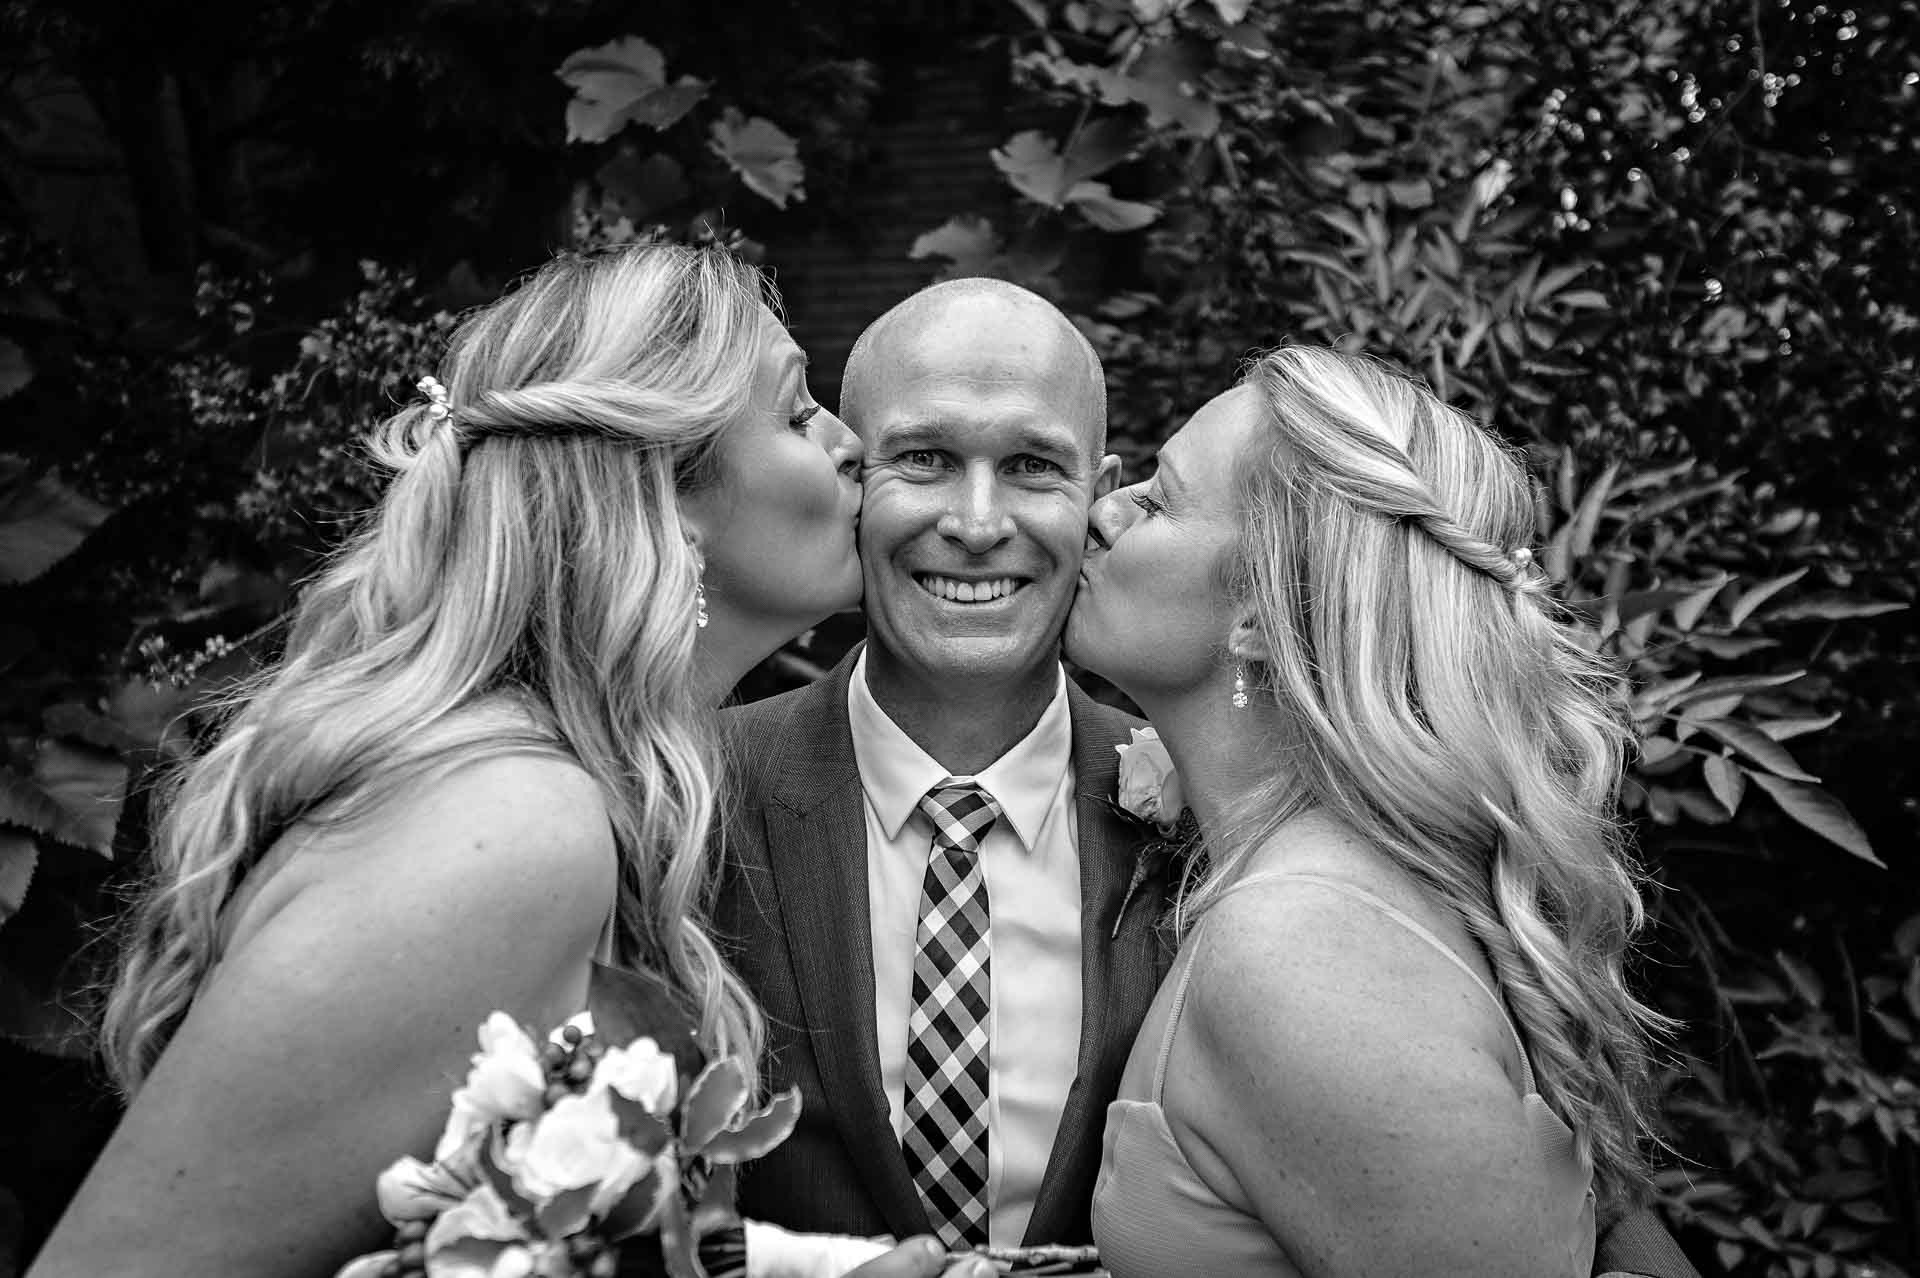 Two bridesmaids kissing groom on cheeks in black and white